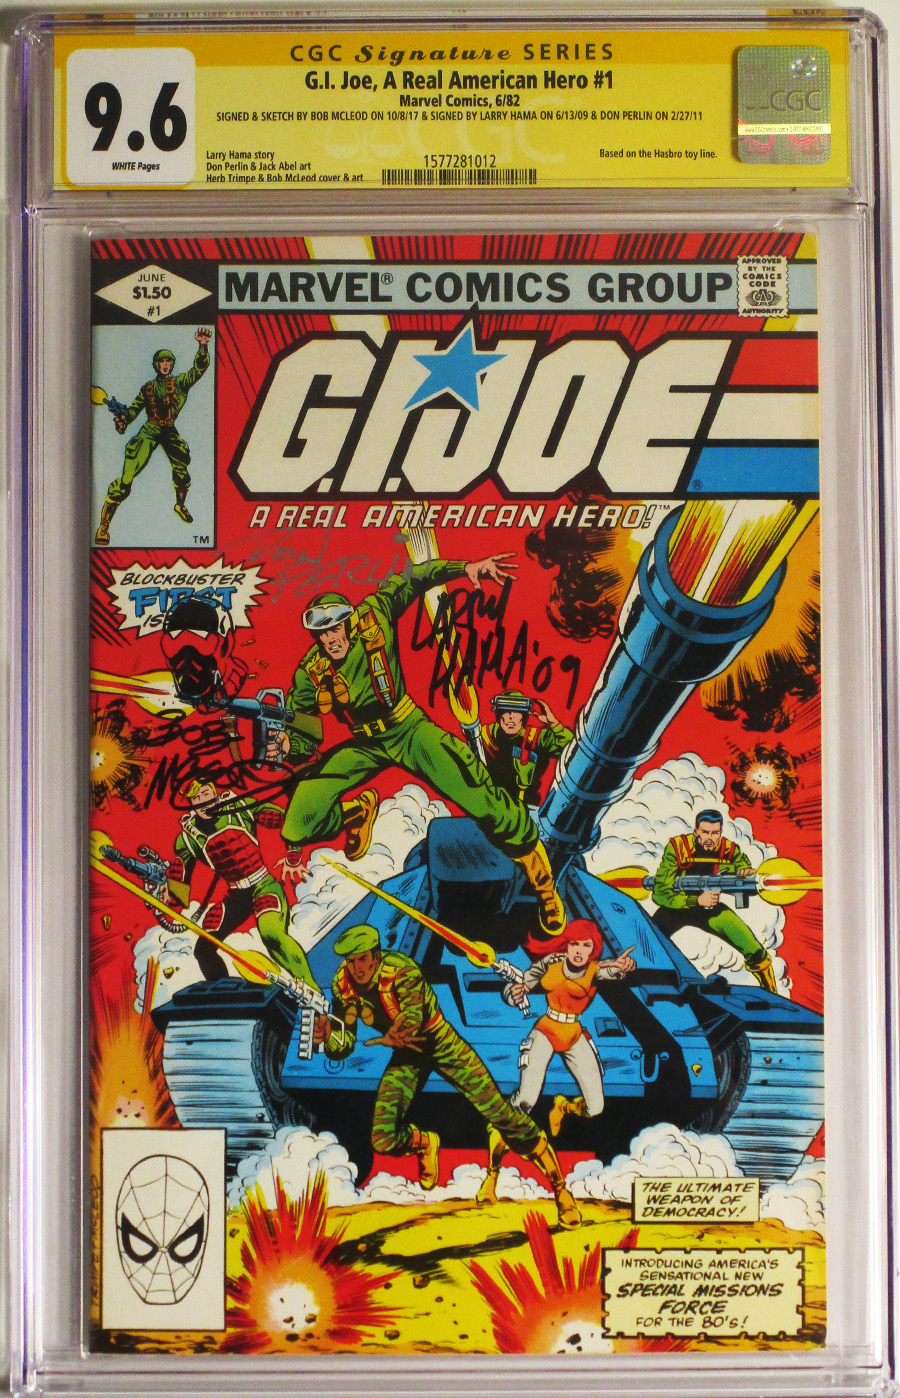 GI Joe A Real American Hero #1 Cover E CGC Signature Series 9.6 Signed by Bob McLeod Larry Hama and Don Perlin 